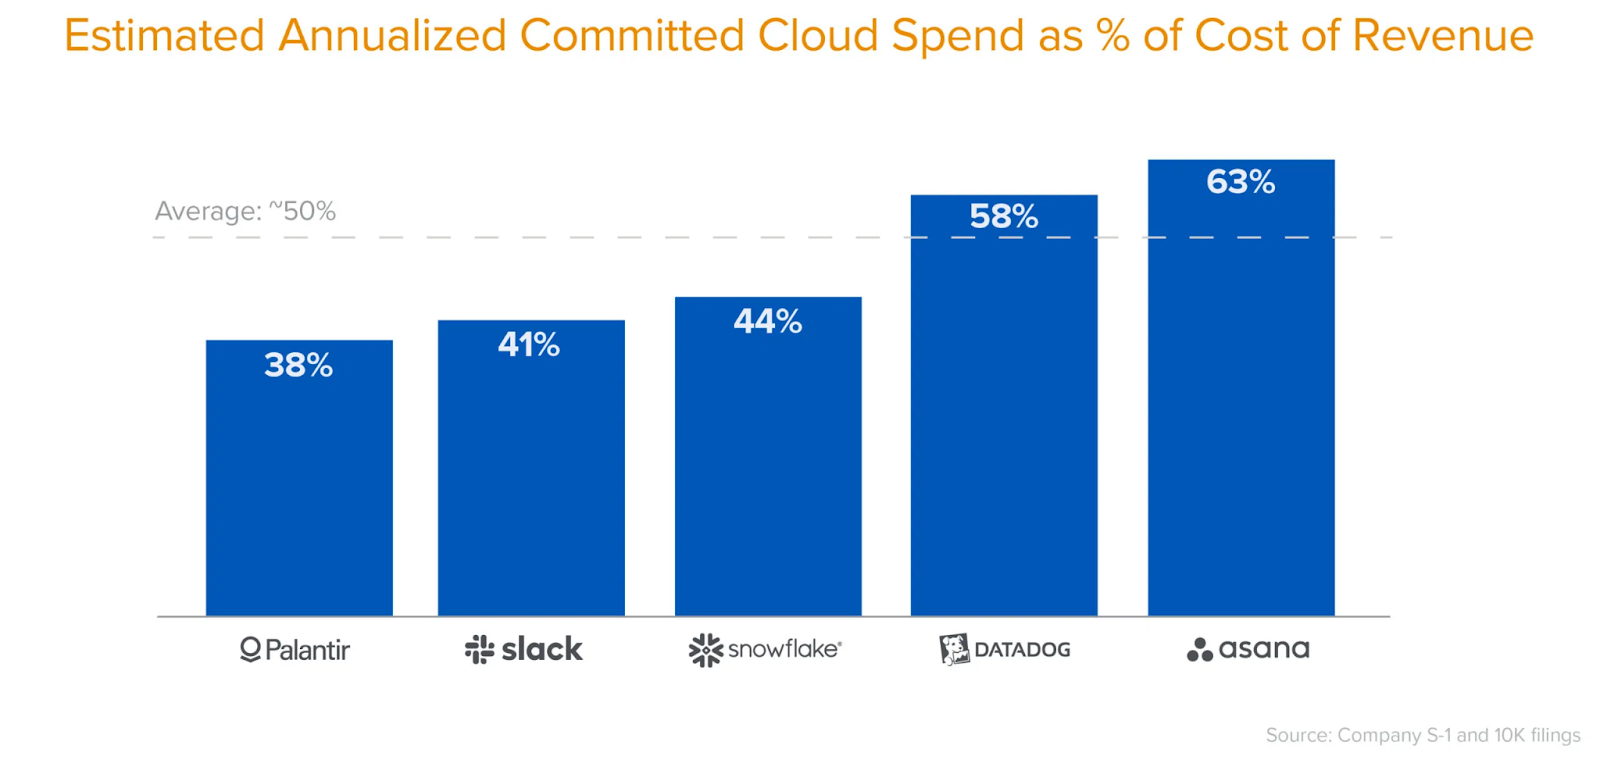 Estimated annualized committed cloud spend as %